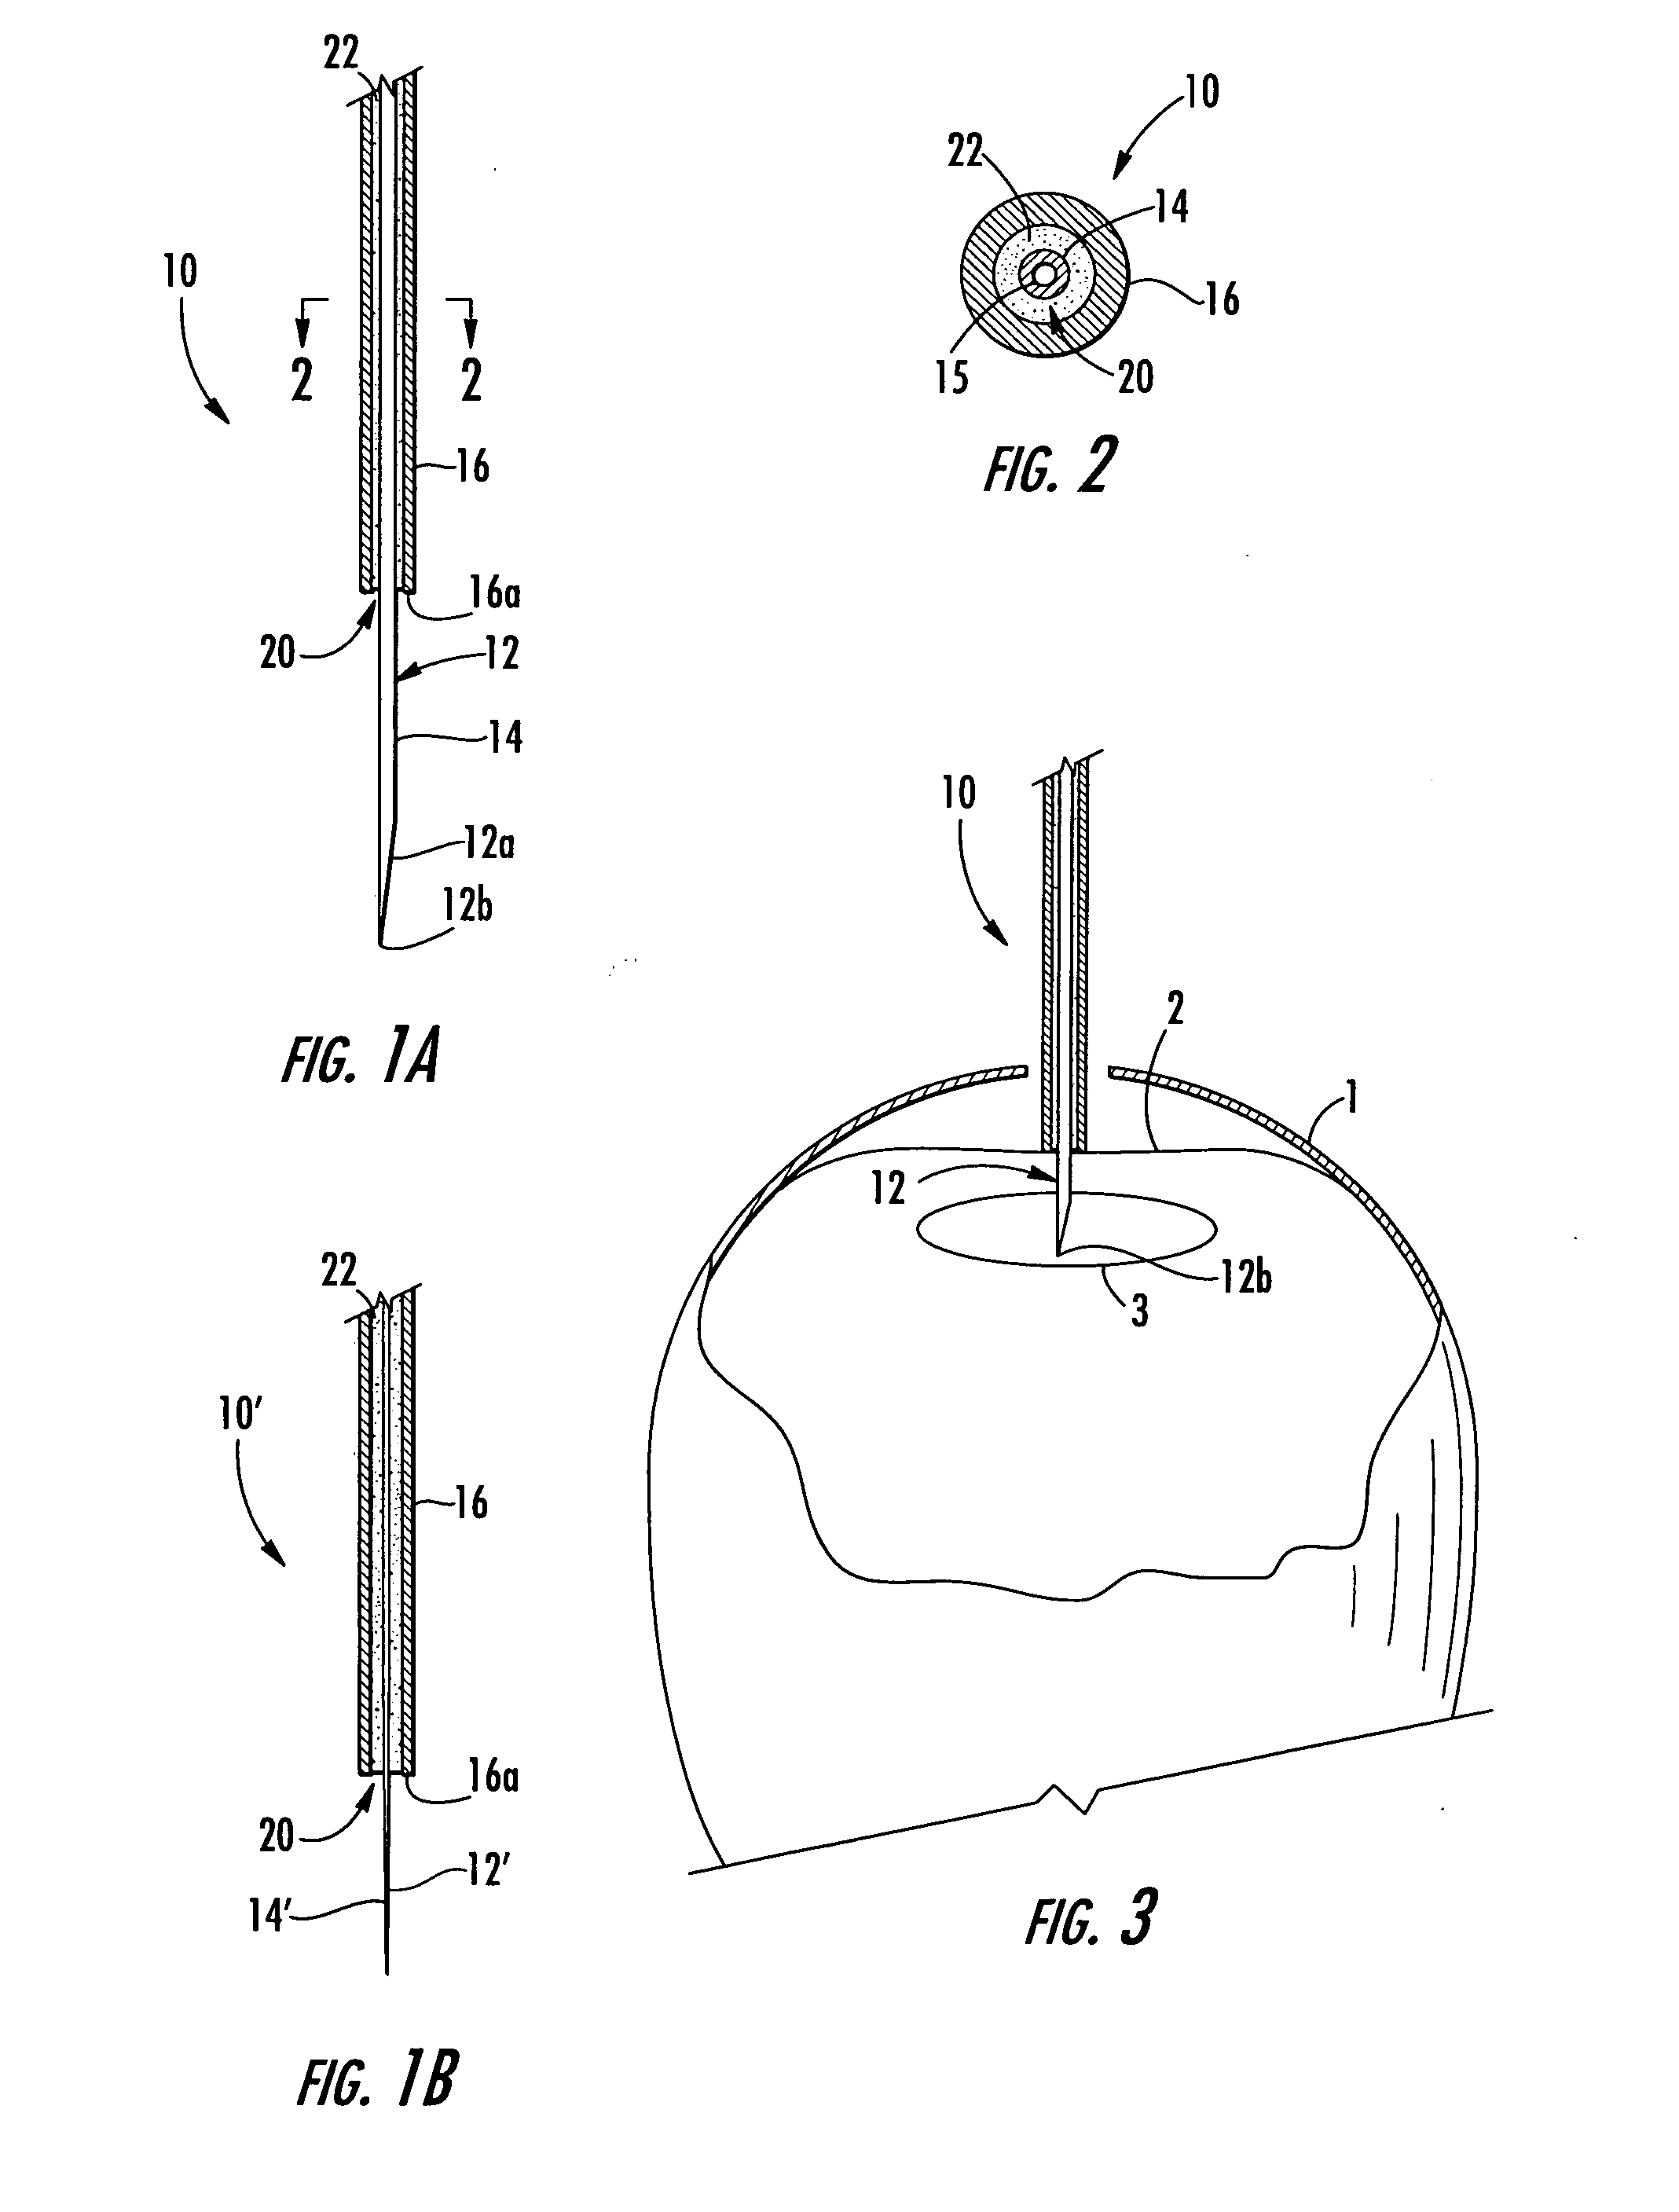 Methods and apparatus for injecting and sampling material through avian egg membranes